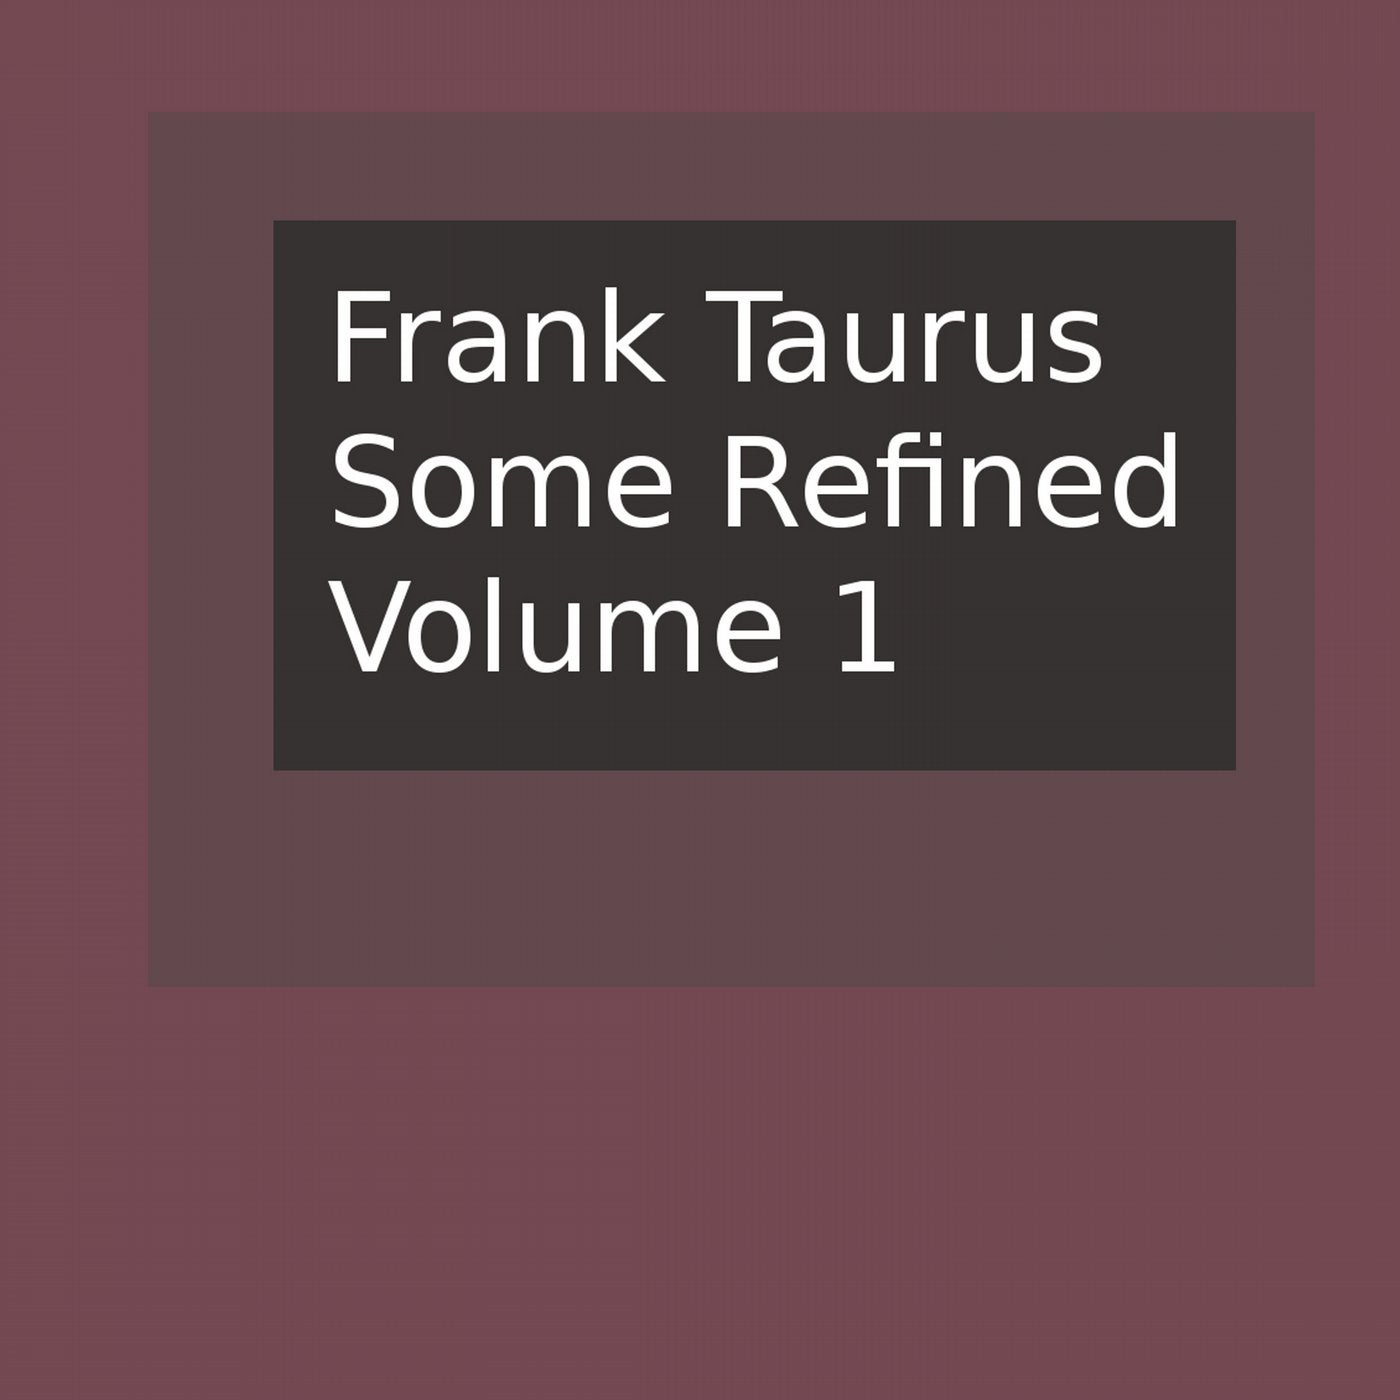 Some Refined, Volume 1